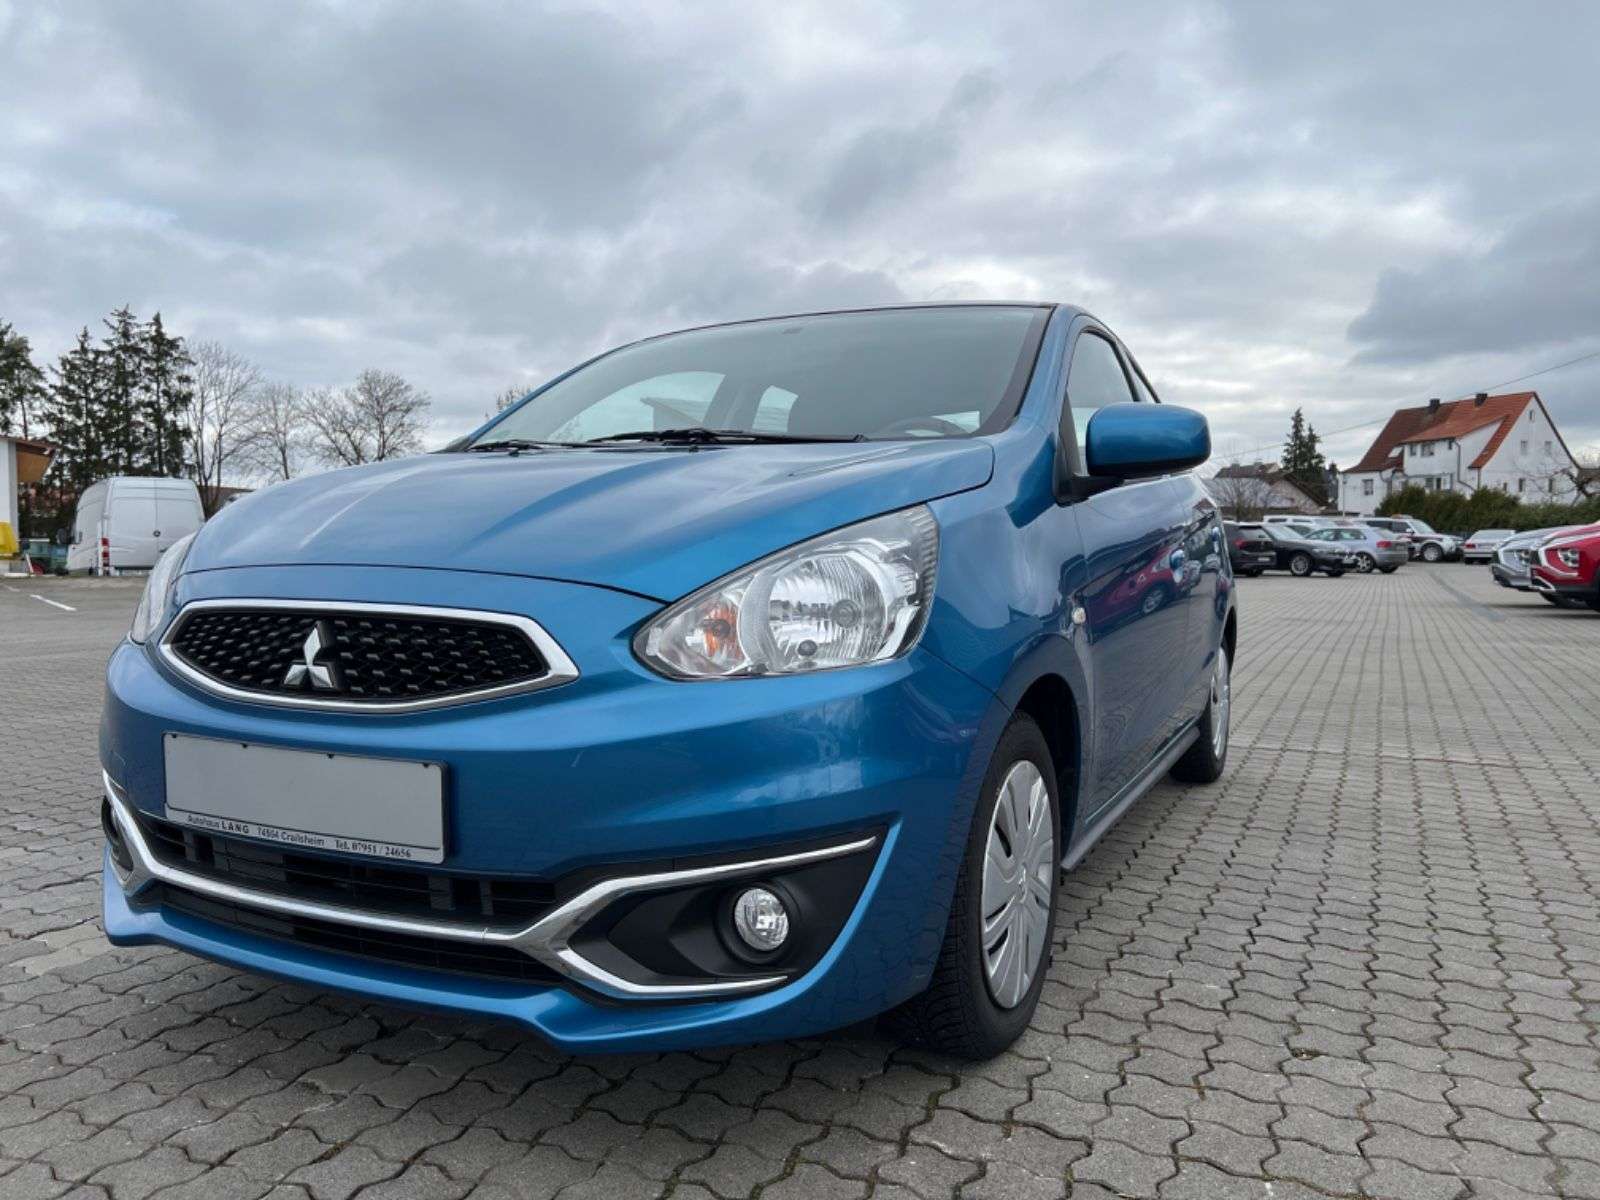 Mitsubishi Space Star Compact in Blue used in Crailsheim for € 9,700.-